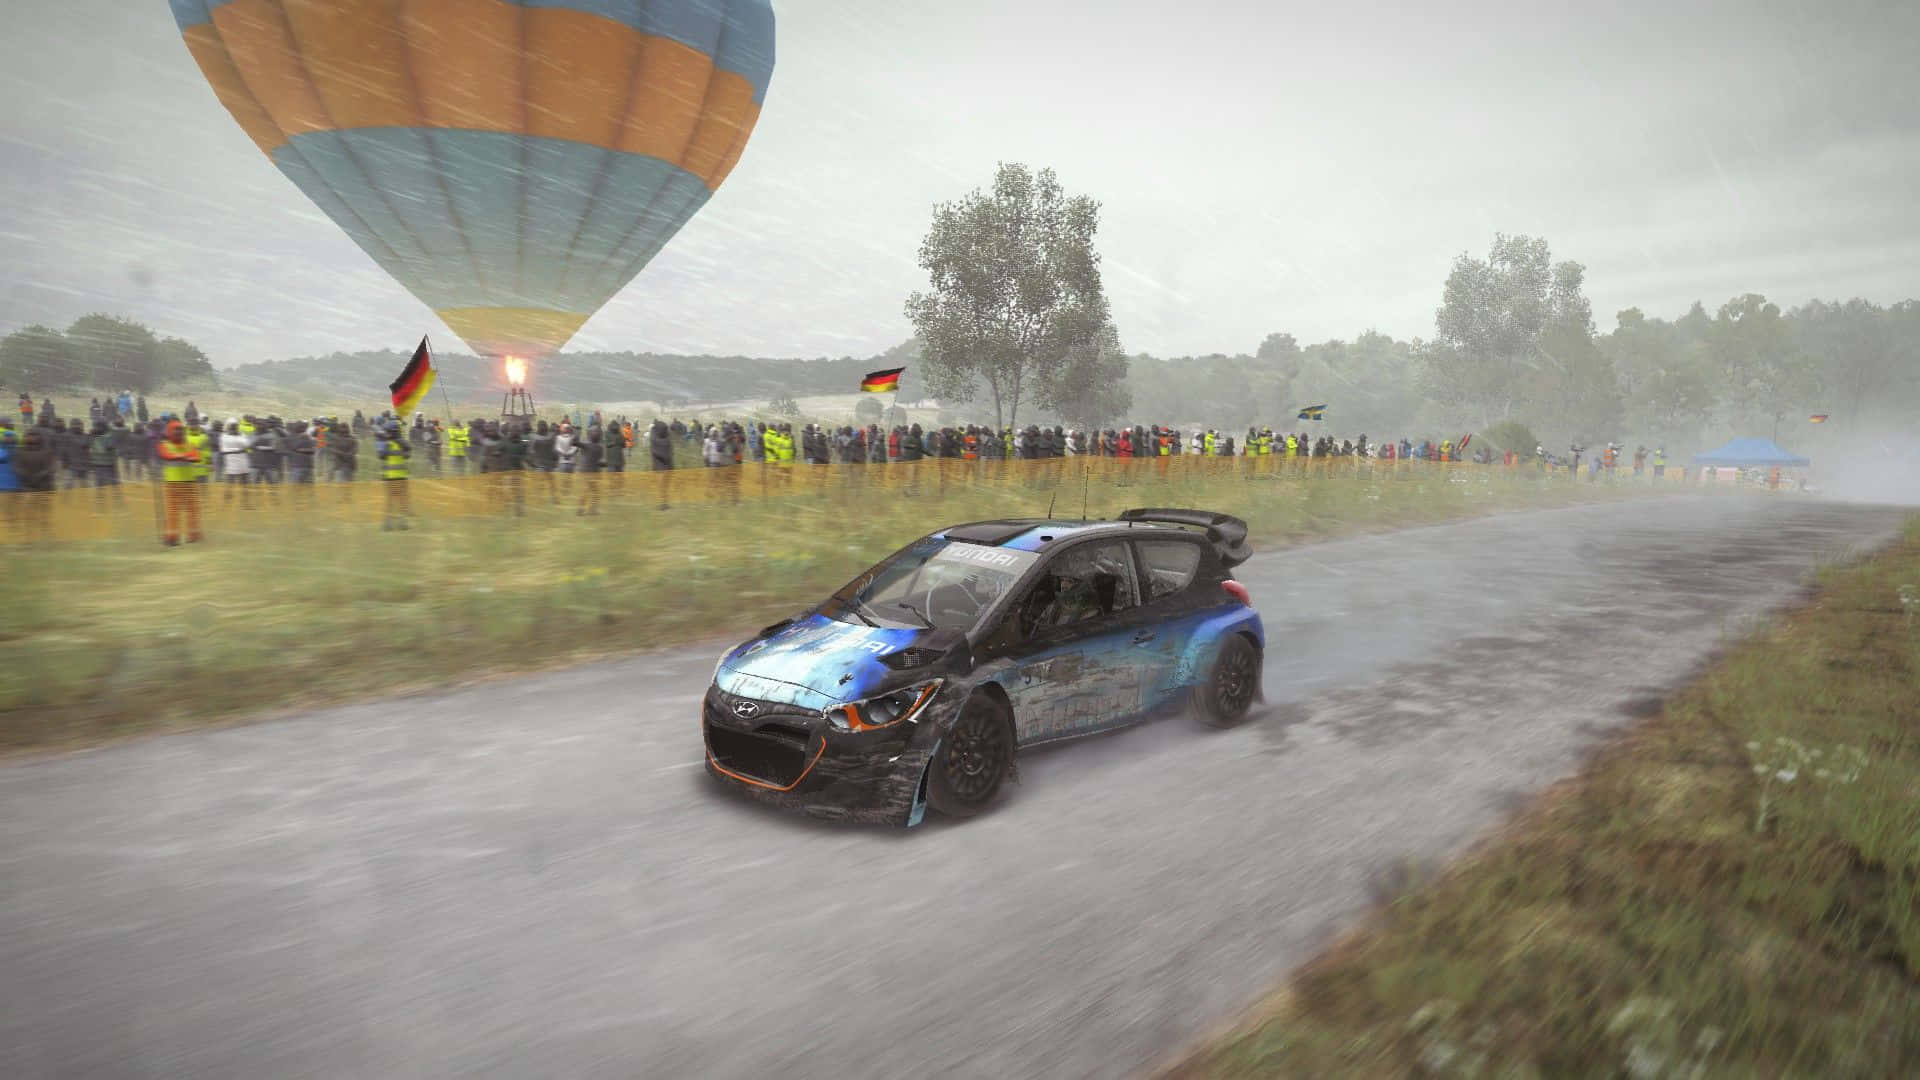 Race to victory and experience nature at its best in Dirt Rally